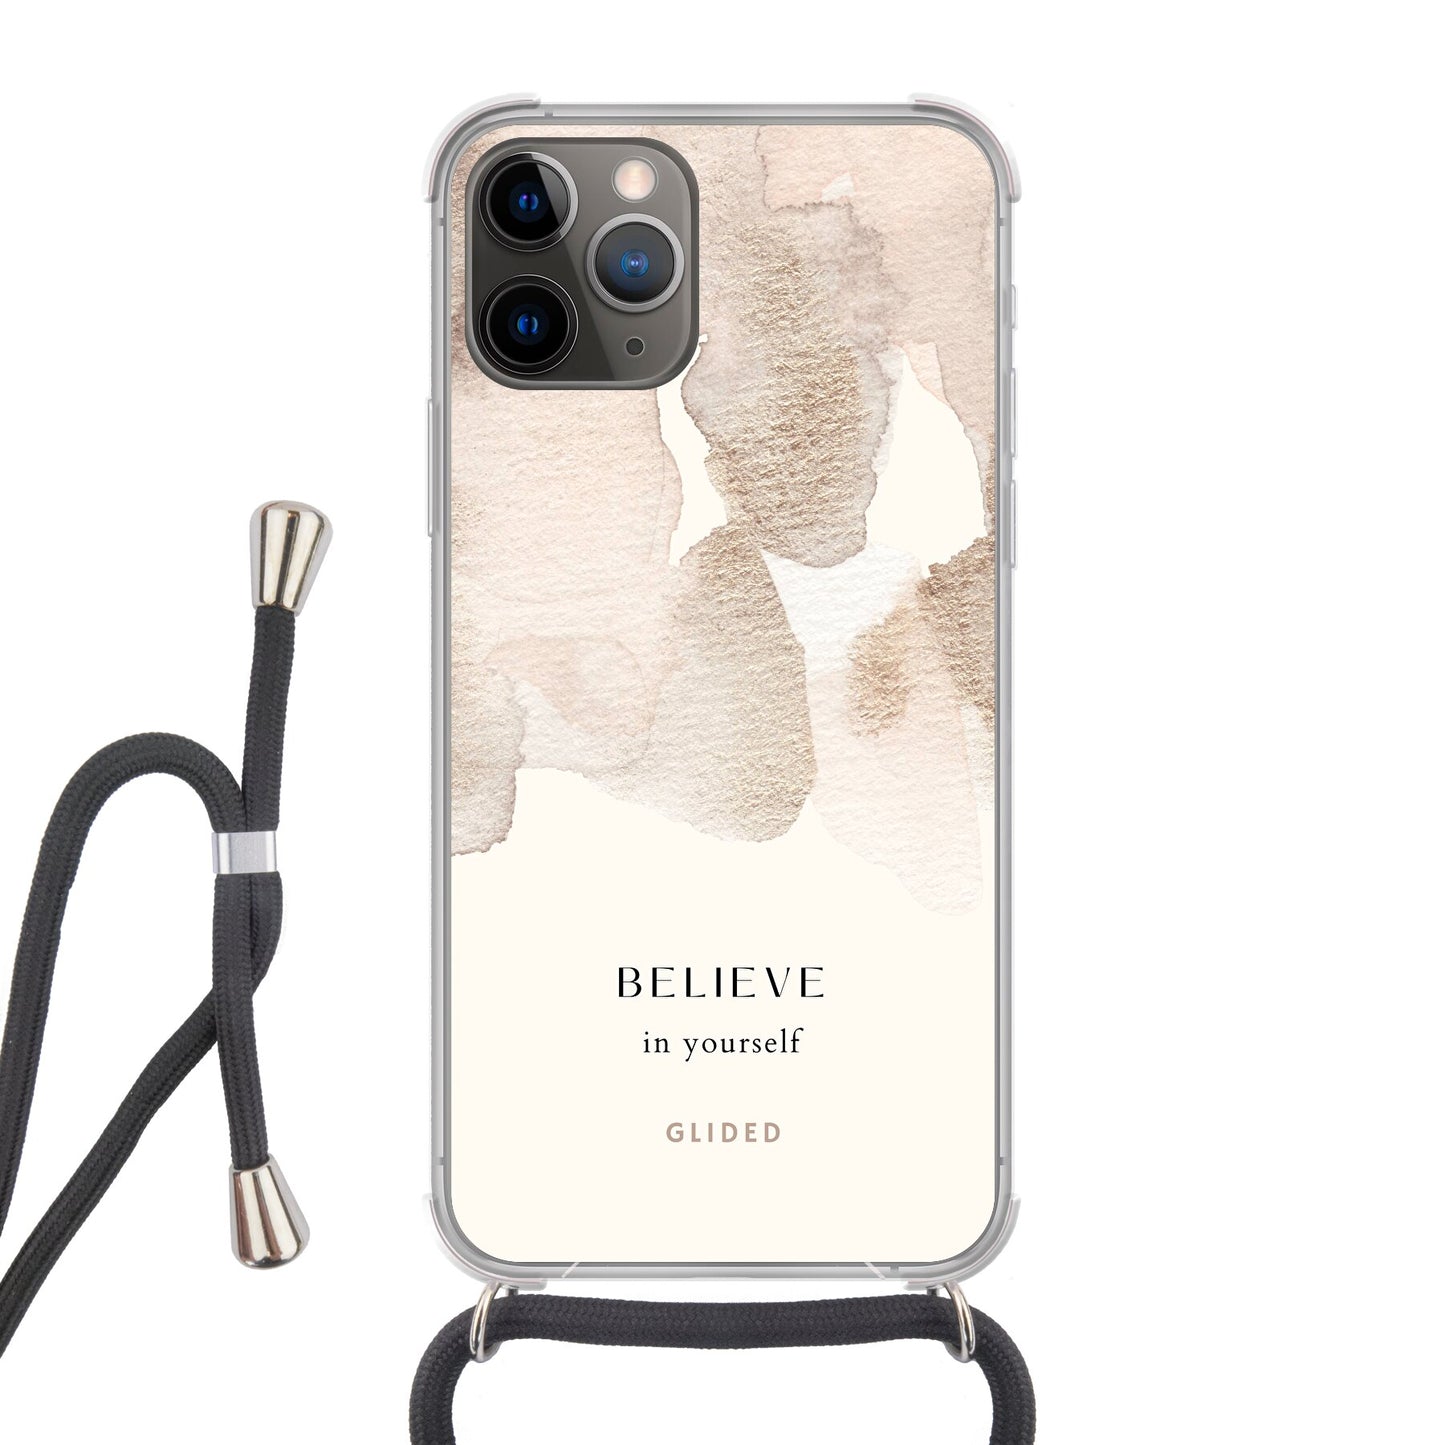 Believe in yourself - iPhone 11 Pro Handyhülle Crossbody case mit Band